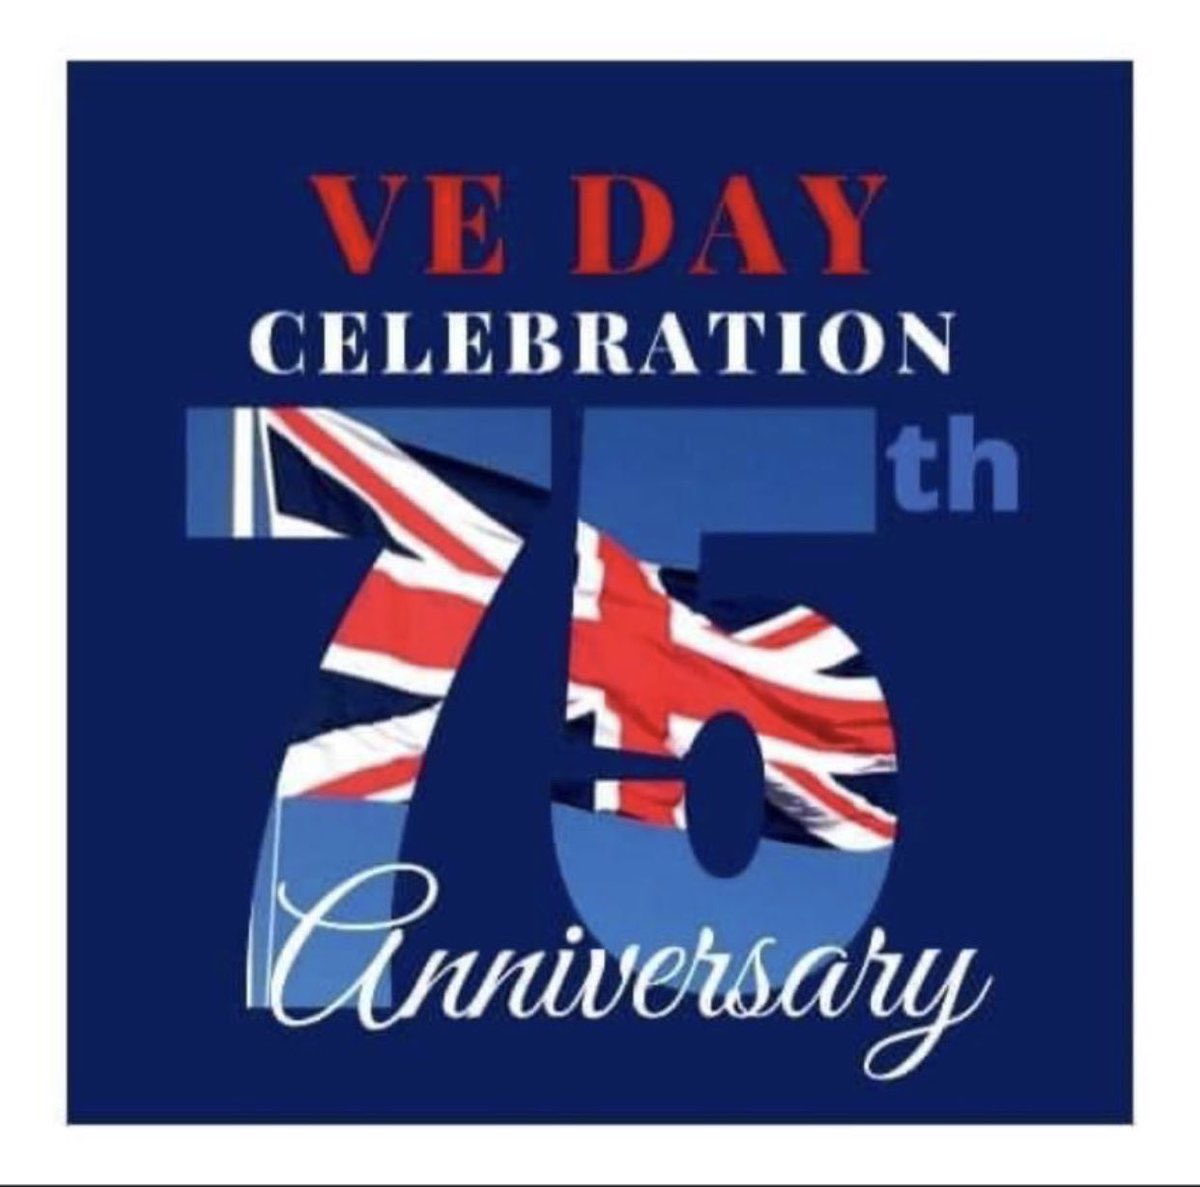 ❤️🤍💙 75th anniversary of VE Day ❤️🤍💙 Our gratitude is eternal ❤️🤍💙

#VEDay #VEDay75 #VEDay2020 #LestWeForget #HappyVE #75thAnniversary #WeThankYou #ToThoseWhoGaveSoMuch #WorldWarII #VictoryinEurope #VEDayAtHome